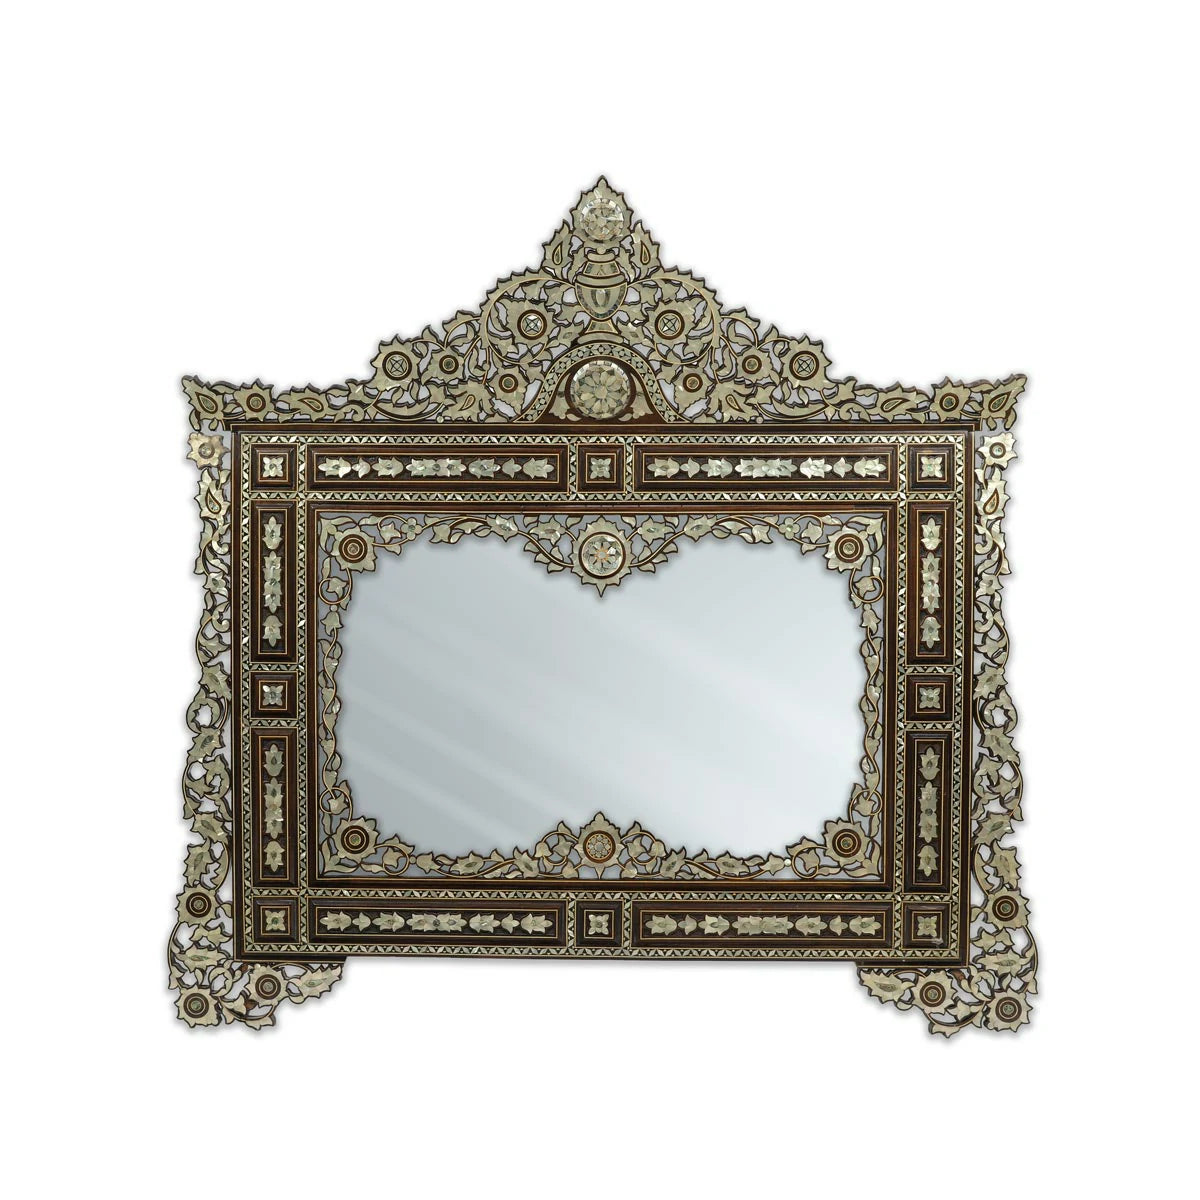 Huge Syrian Artisan Made Landscape Mirror with Mother of Pearl, Abalone & Marquetry Inlays in Moorish Patterns